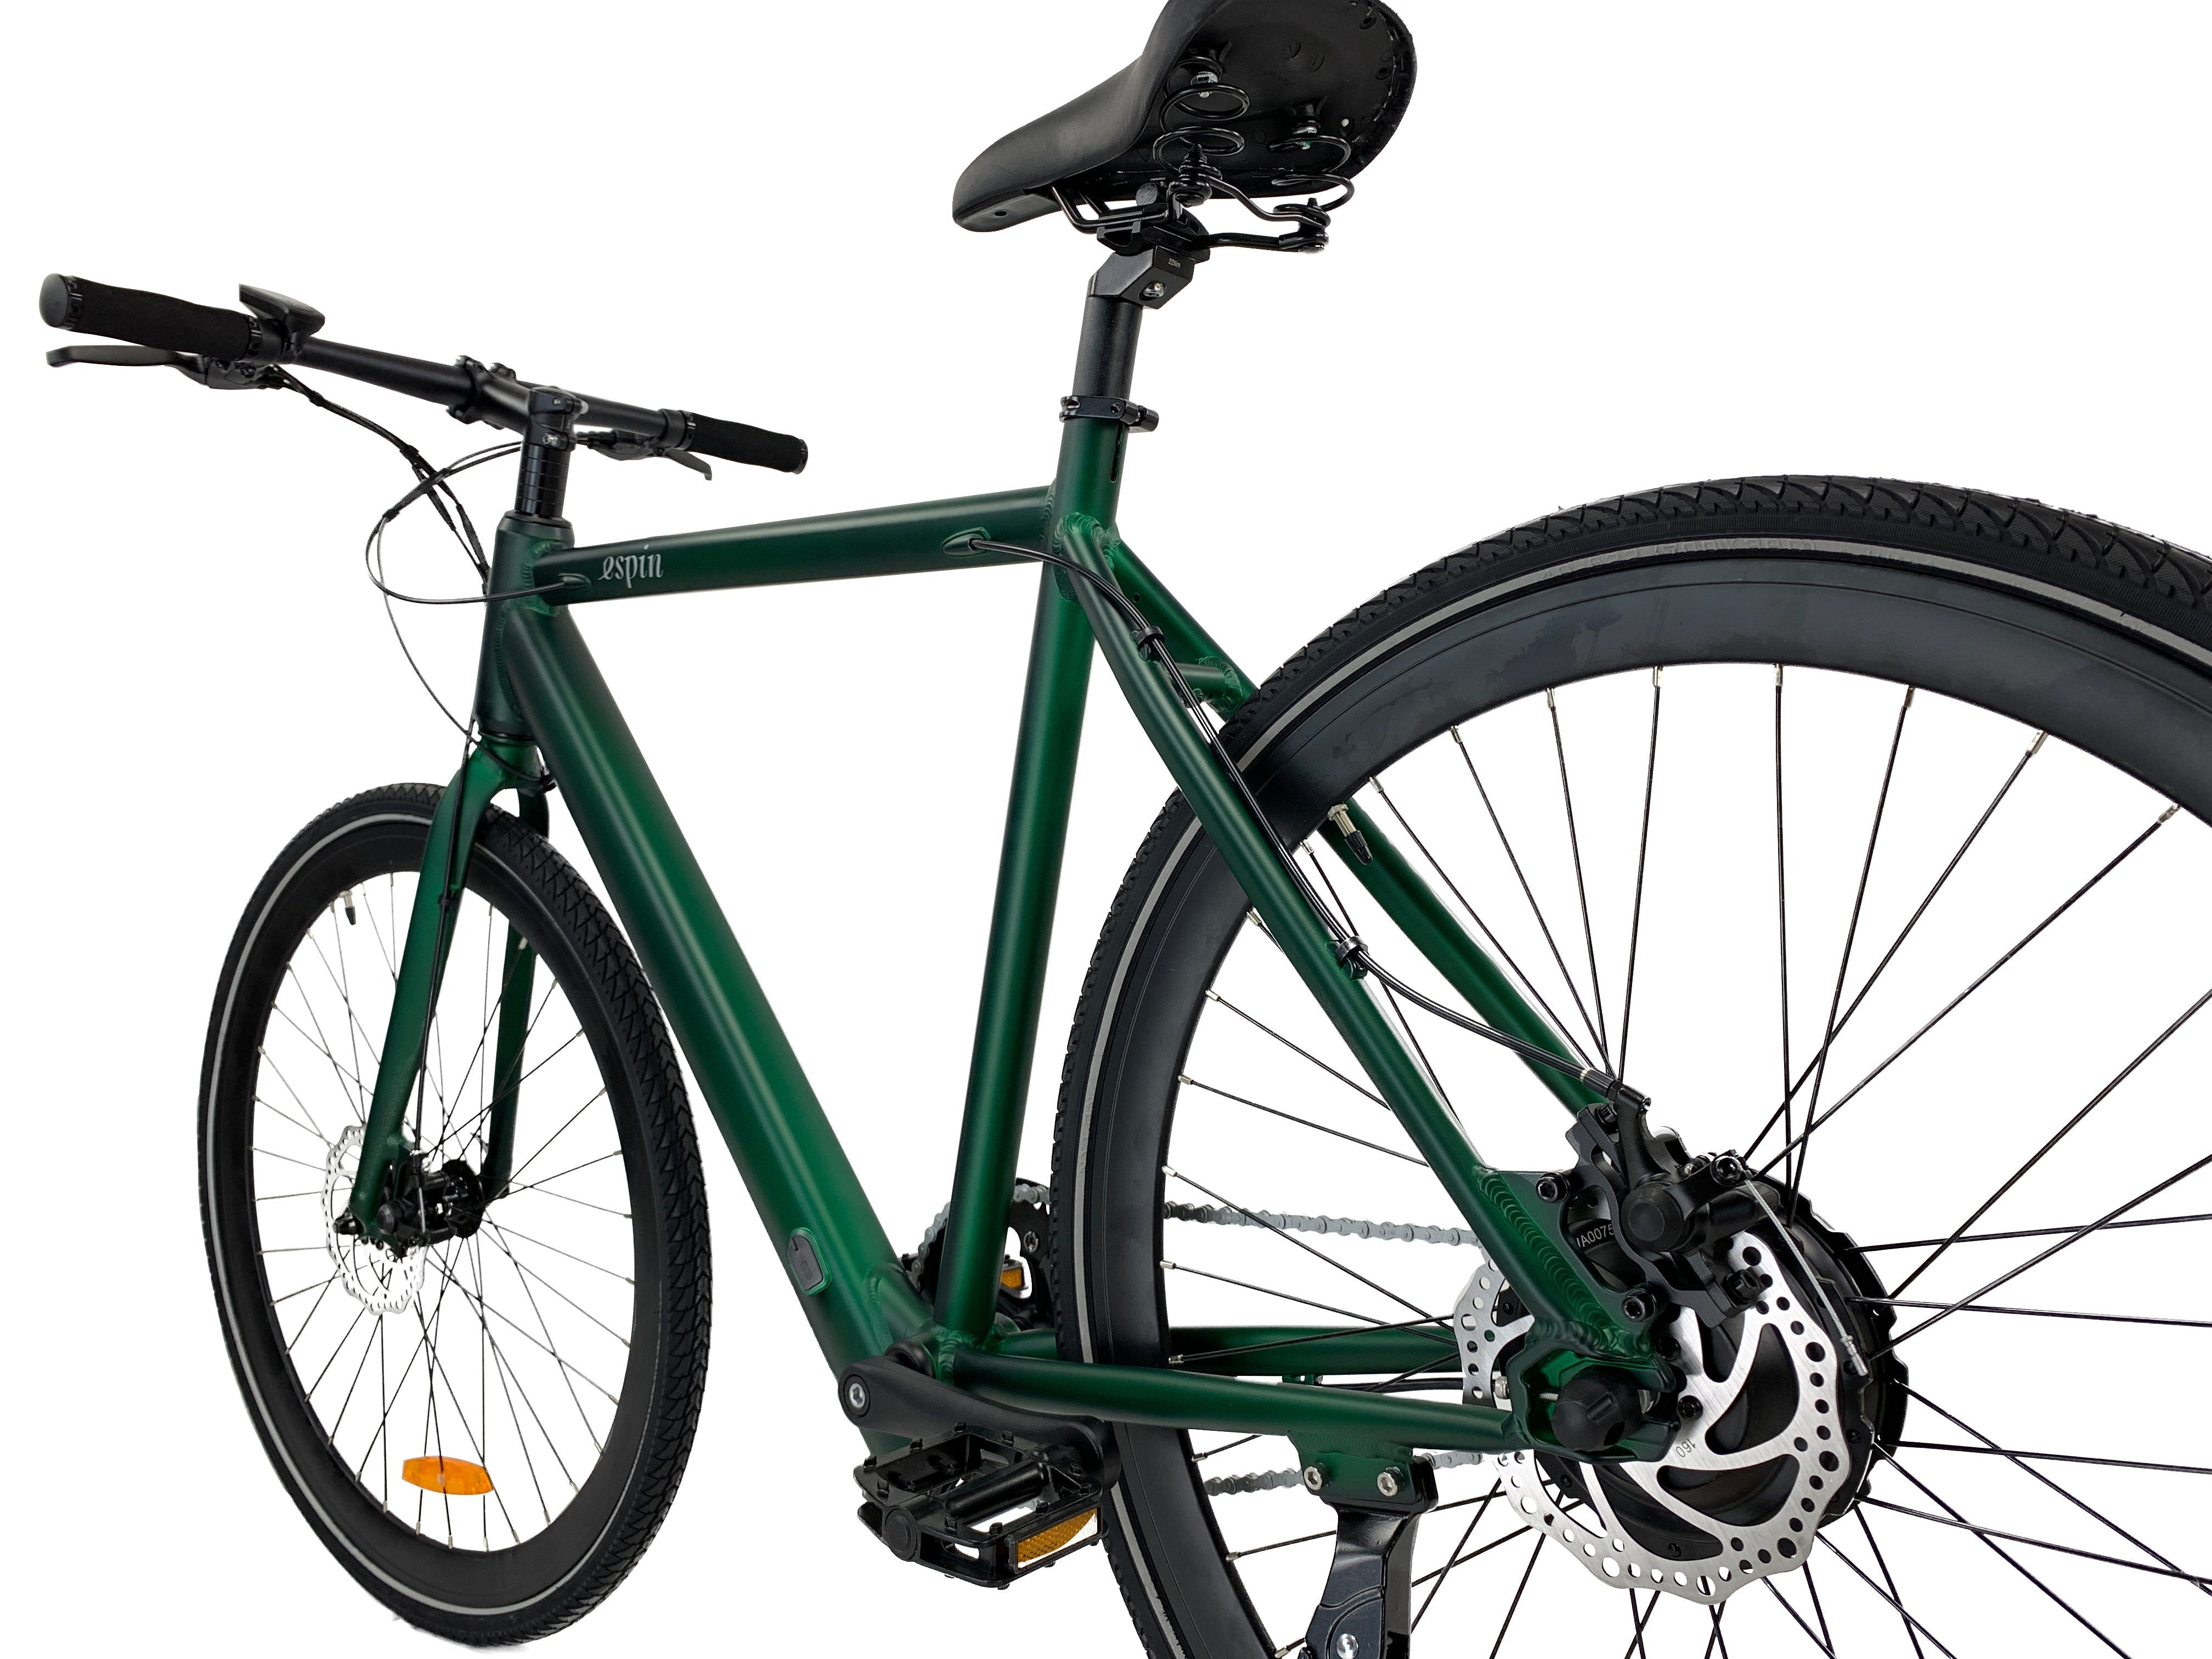 Our electric bikes are custom-designed for your lifestyle and ride. Shop award-winning, affordable ebikes for City, Commuter, Cargo, Utility, Folding